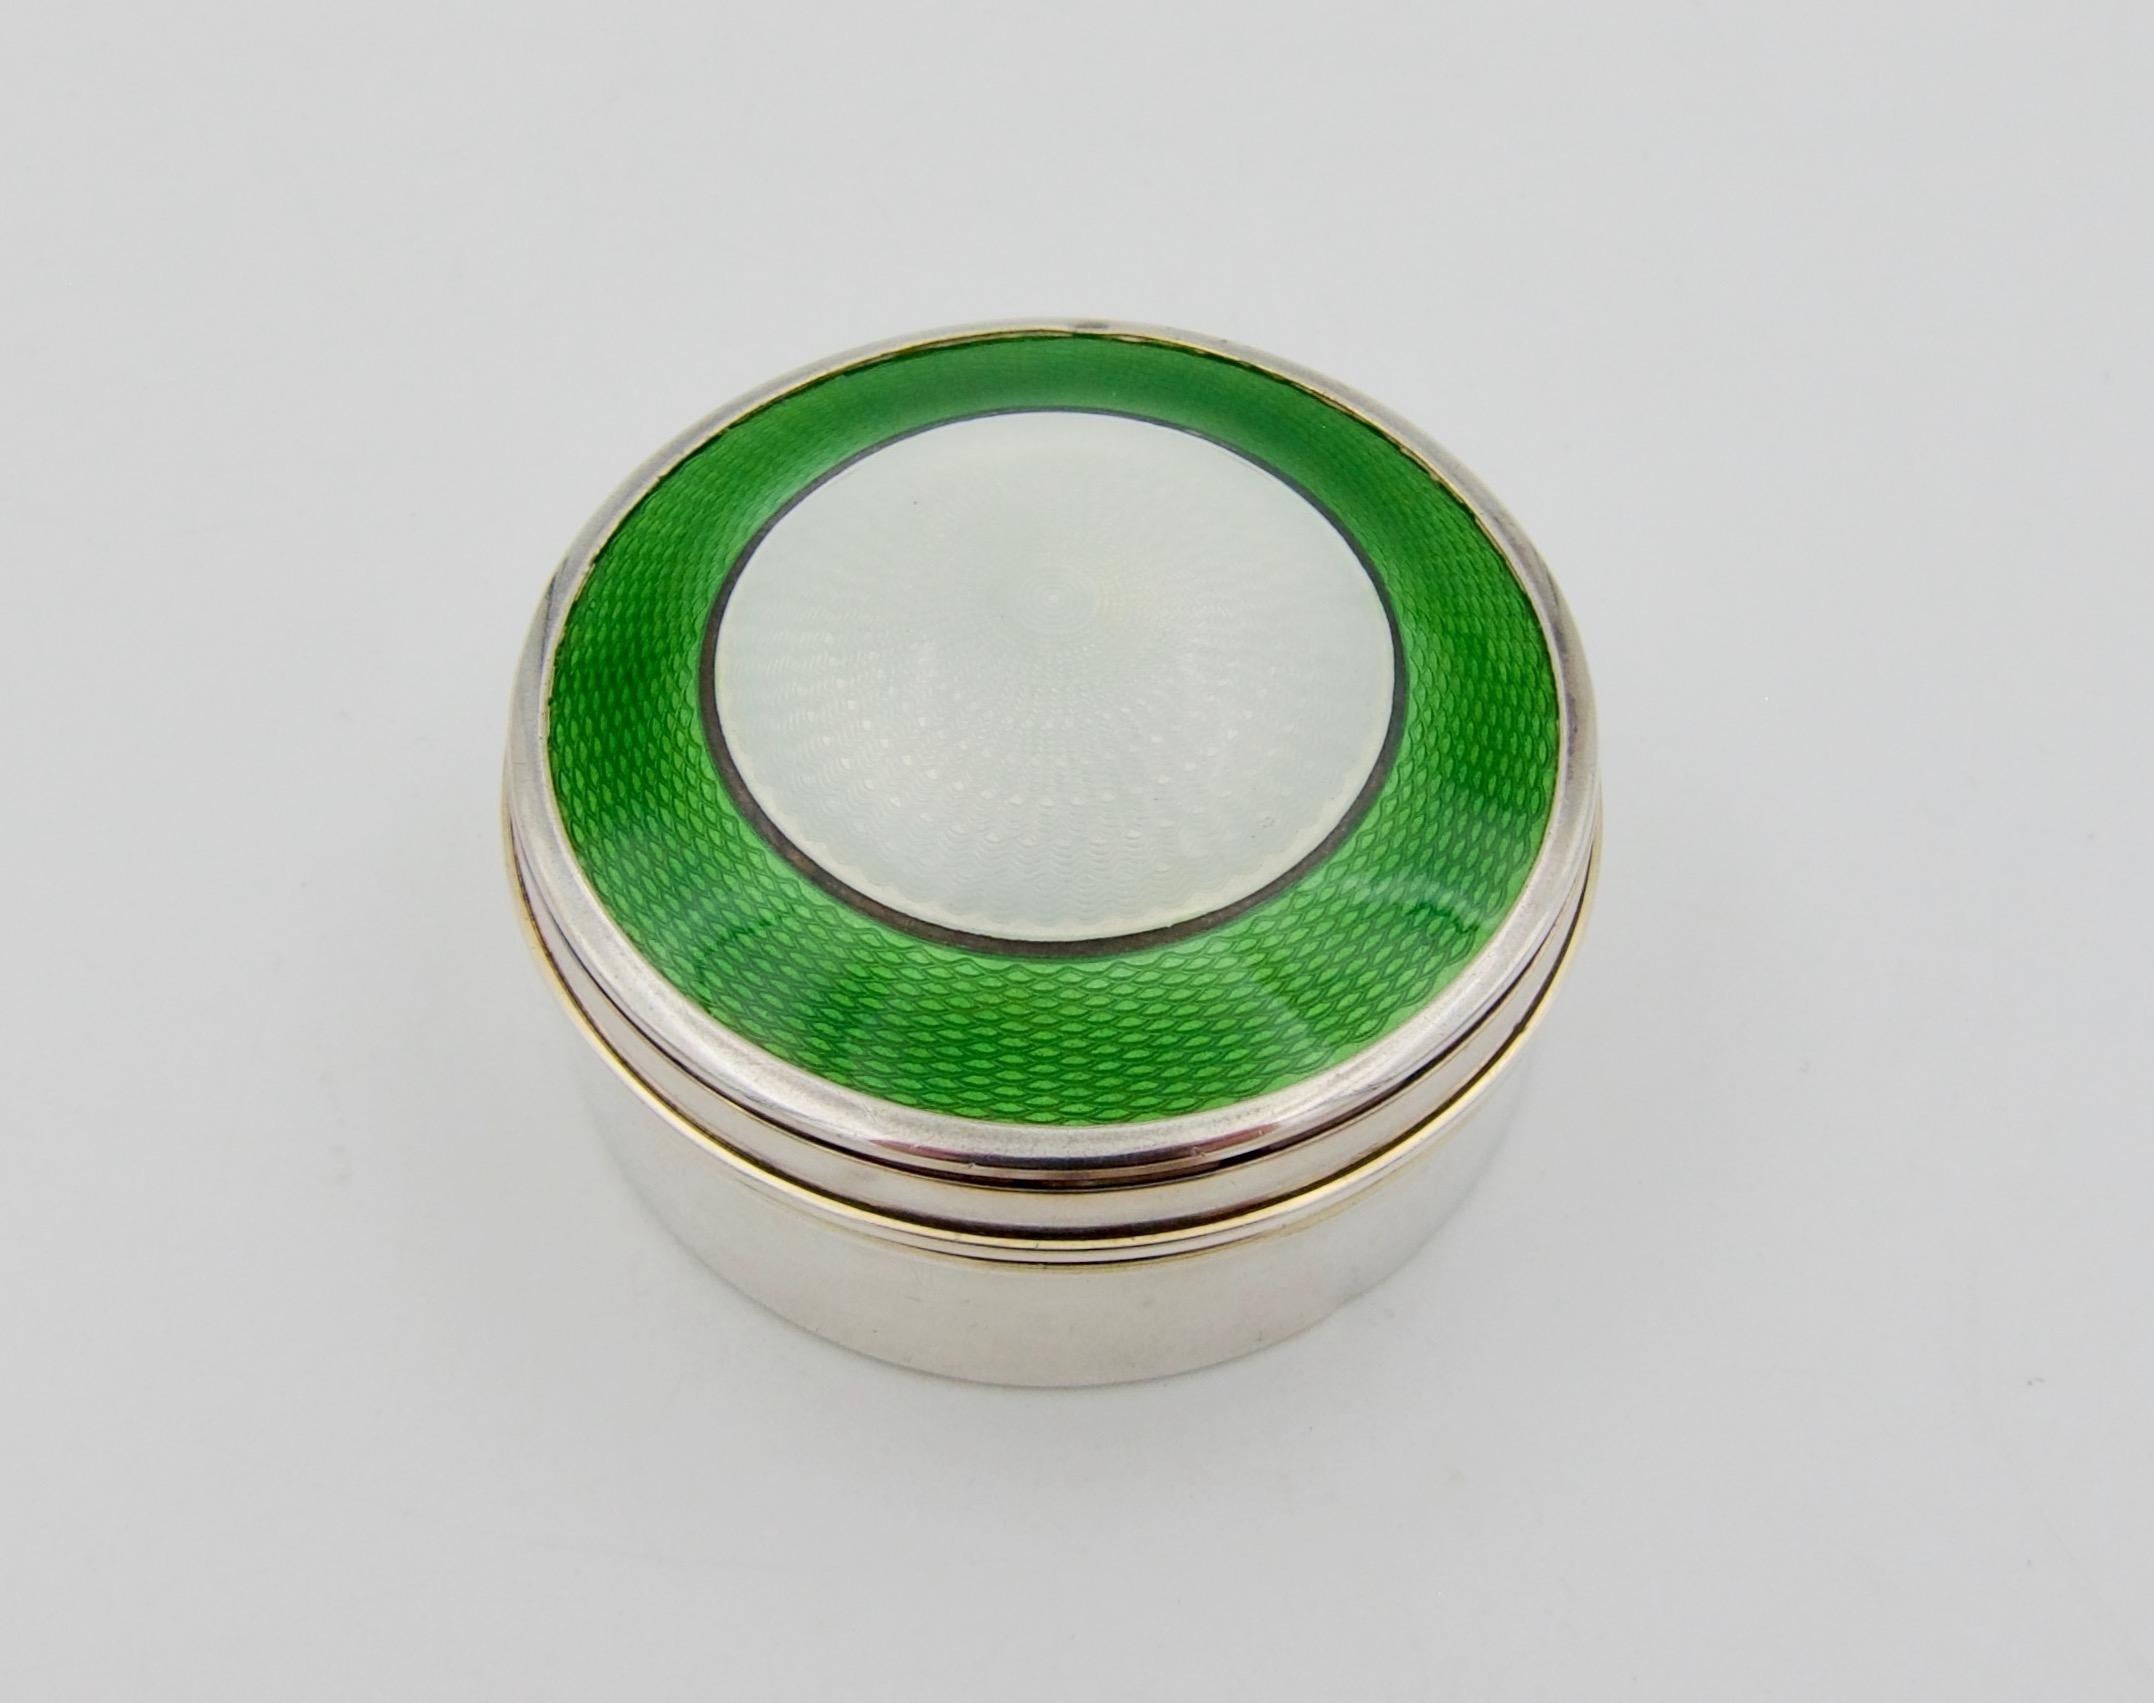 An antique English sterling silver patch or pill box with a domed lid, guilloche enamel decoration, and a gilt interior by silversmith Henry Matthews of Birmingham, date marked for 1911. The lid of the hinged circular box is decorated with a central